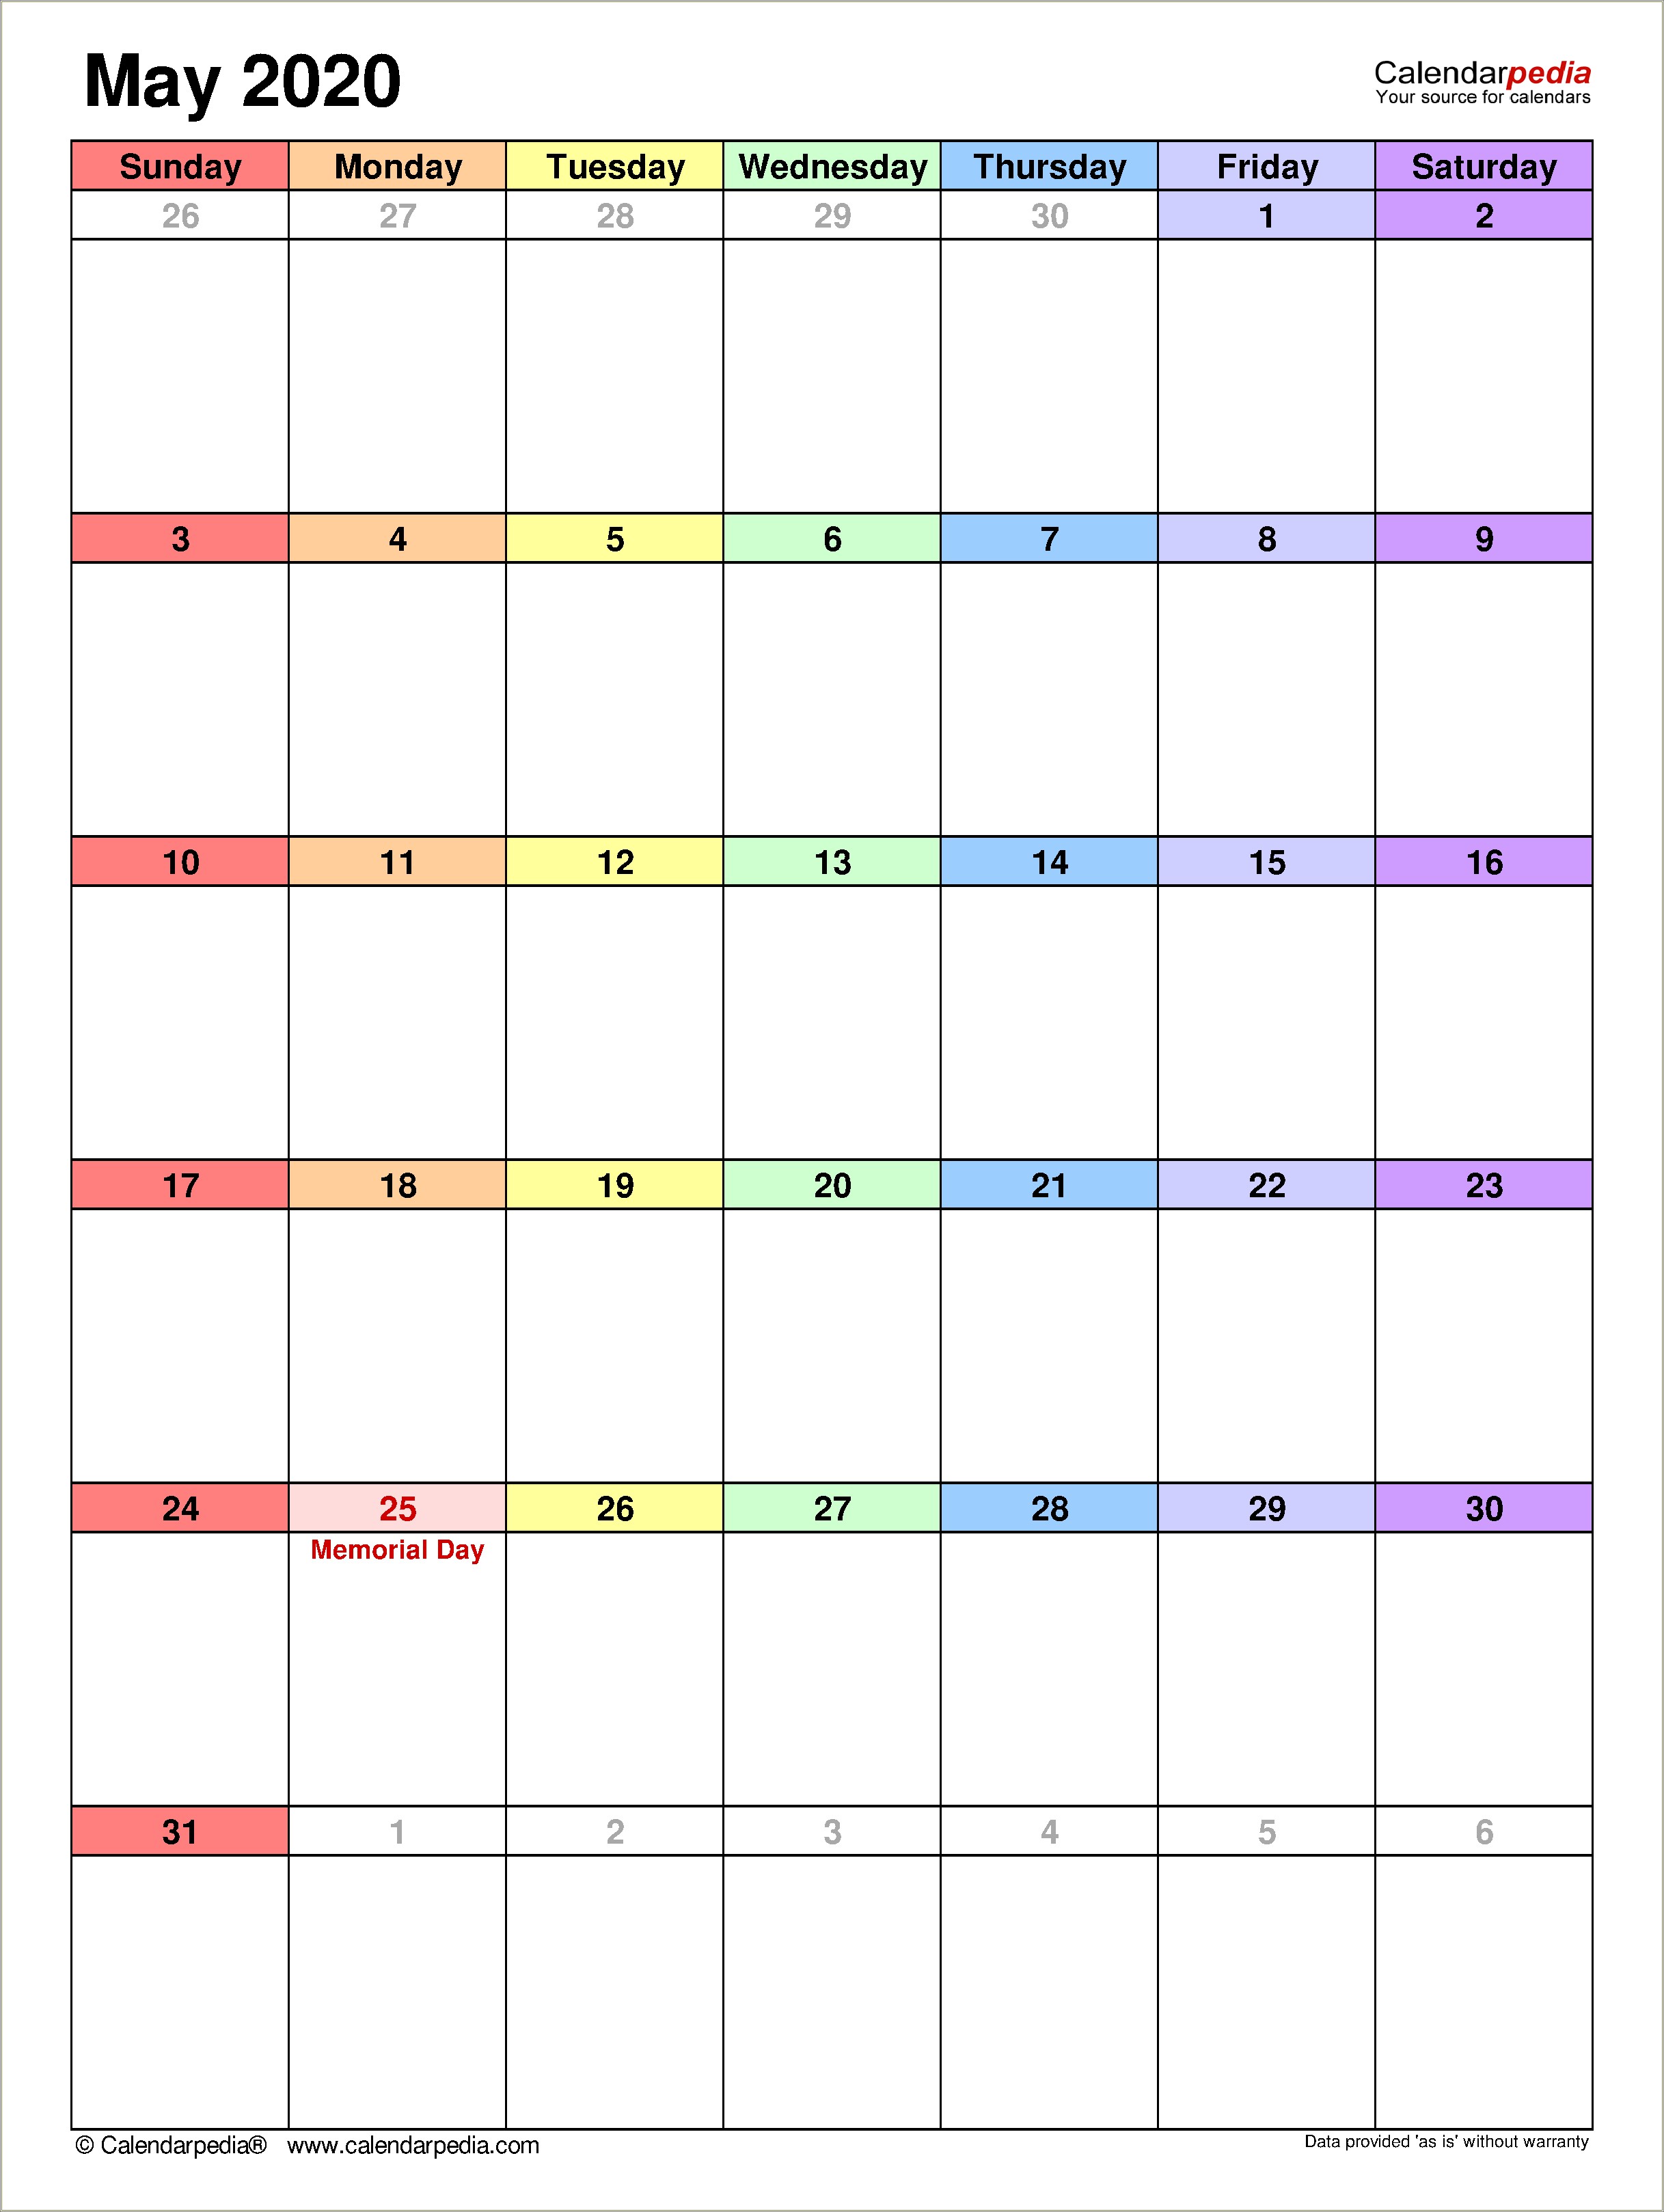 Free Blank Free Calendar Templates For May 2020